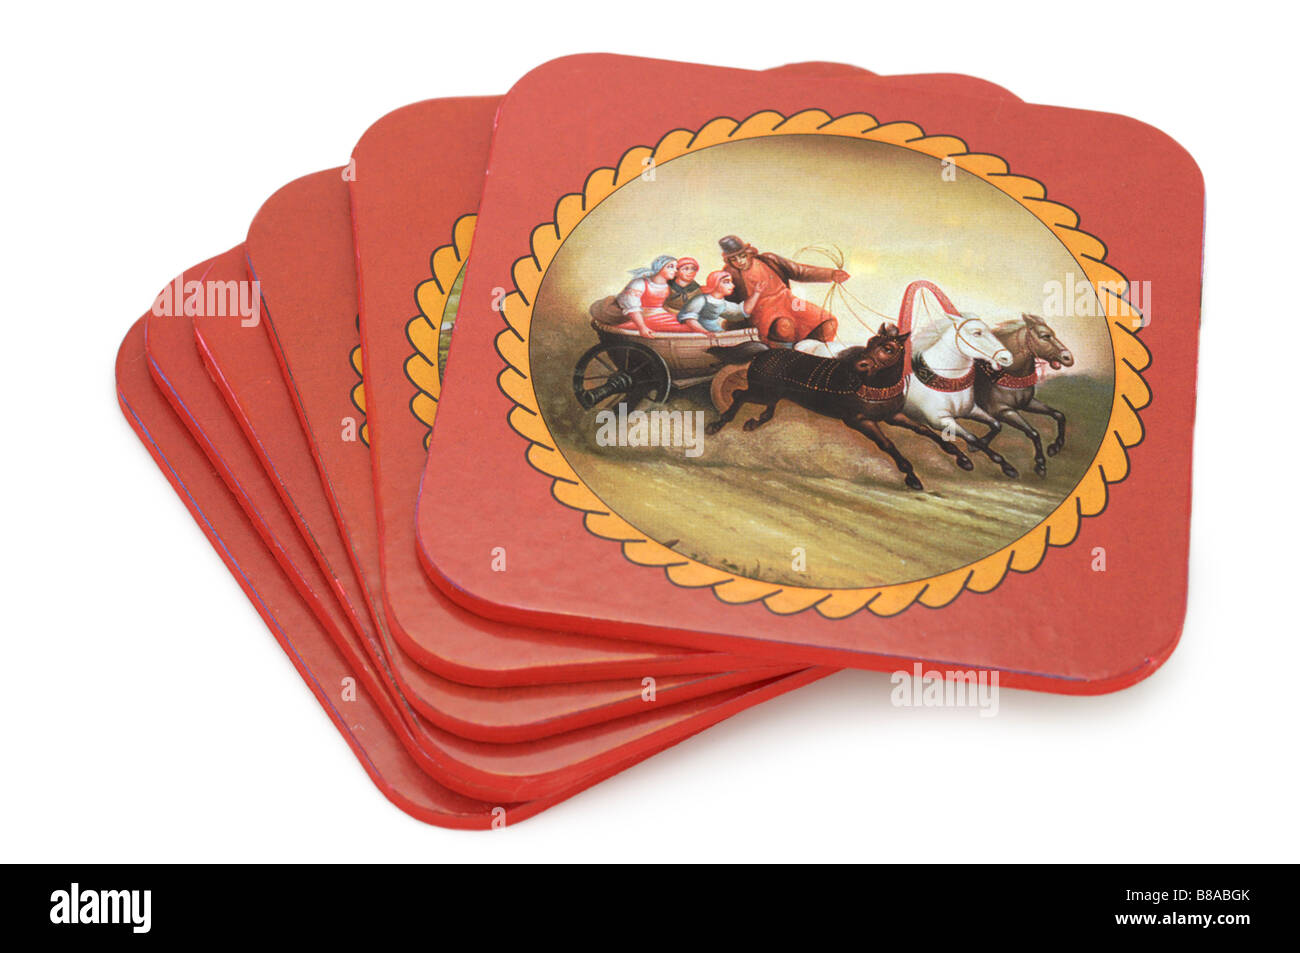 Coasters, image depicts traditional Russian theme, Peasants in a Troika (three horse carriage). Stock Photo